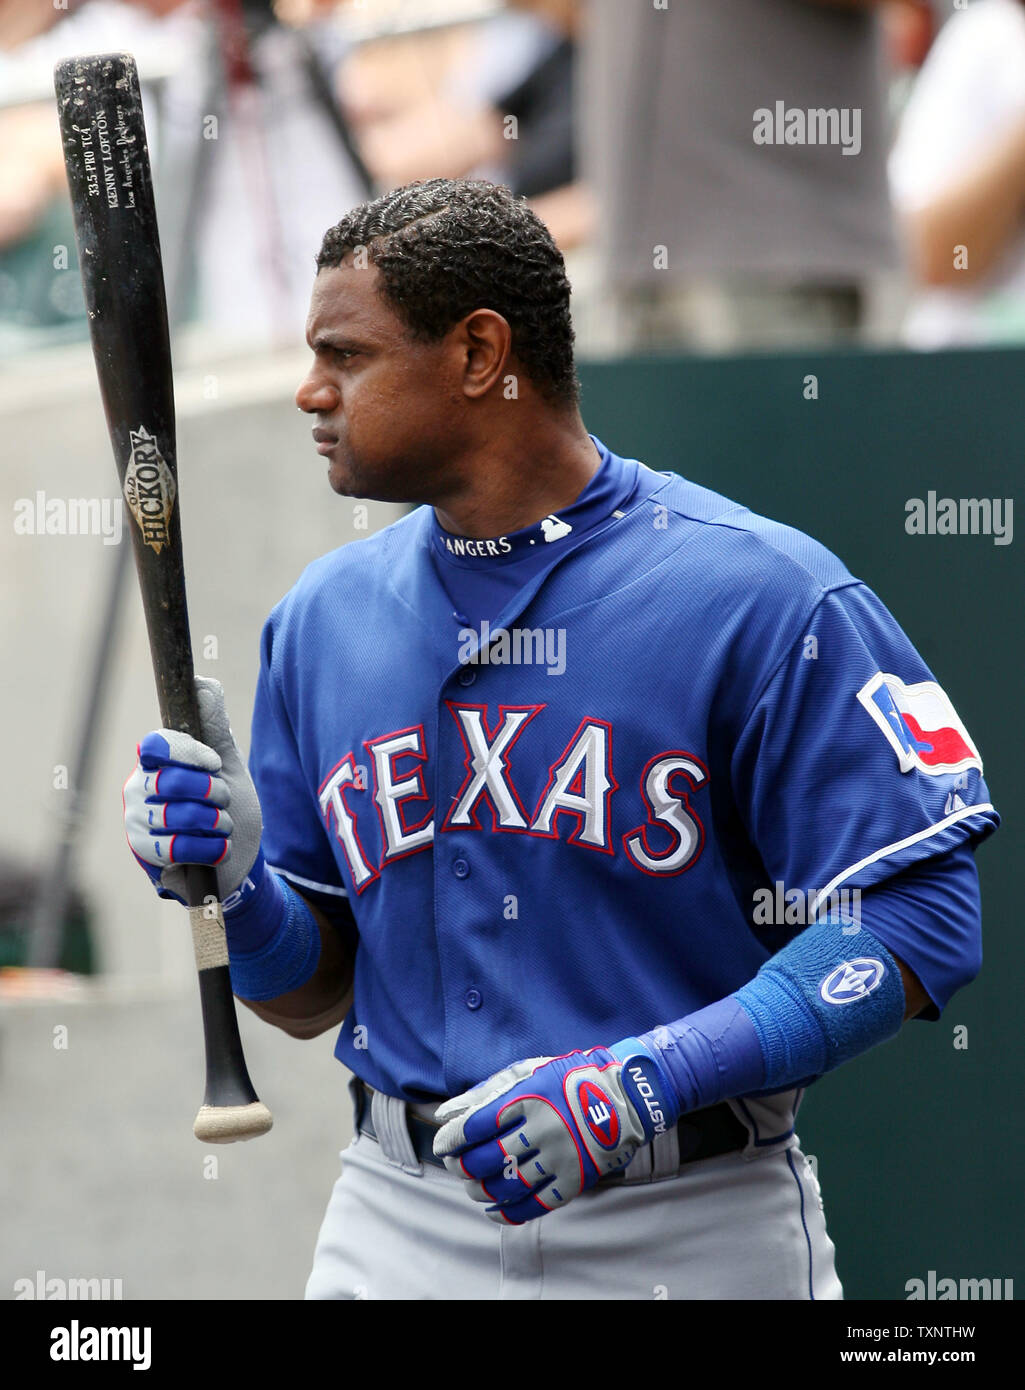 Texas Rangers' Sammy Sosa walks around the dugout in the third inning as he  waits for his turn at bat against the Detroit Tigers at Comerica Park in  Detroit on June 28,